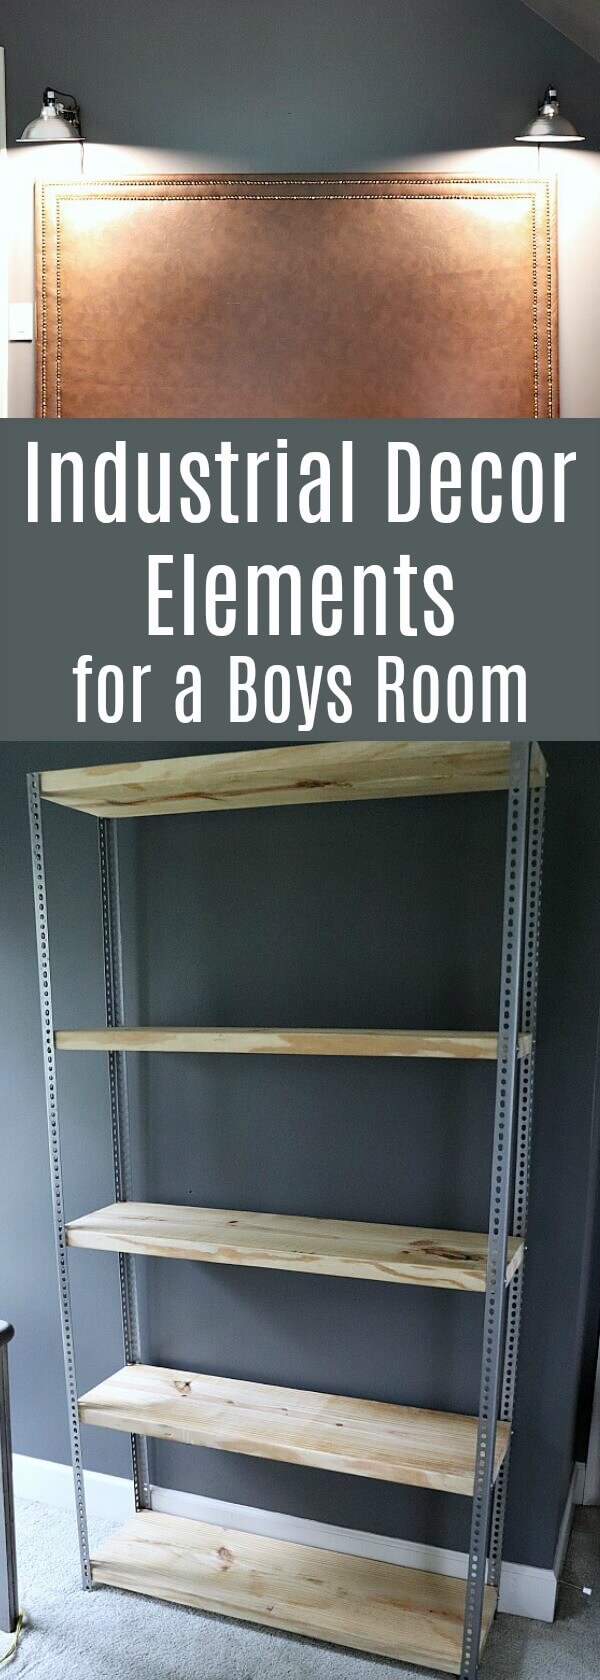 Industrial Decor Elements for a Boys Room - we are in week 4 of this Spring's One Room Challenge. This week, we had fun adding industrial elements that my Teen son loves!